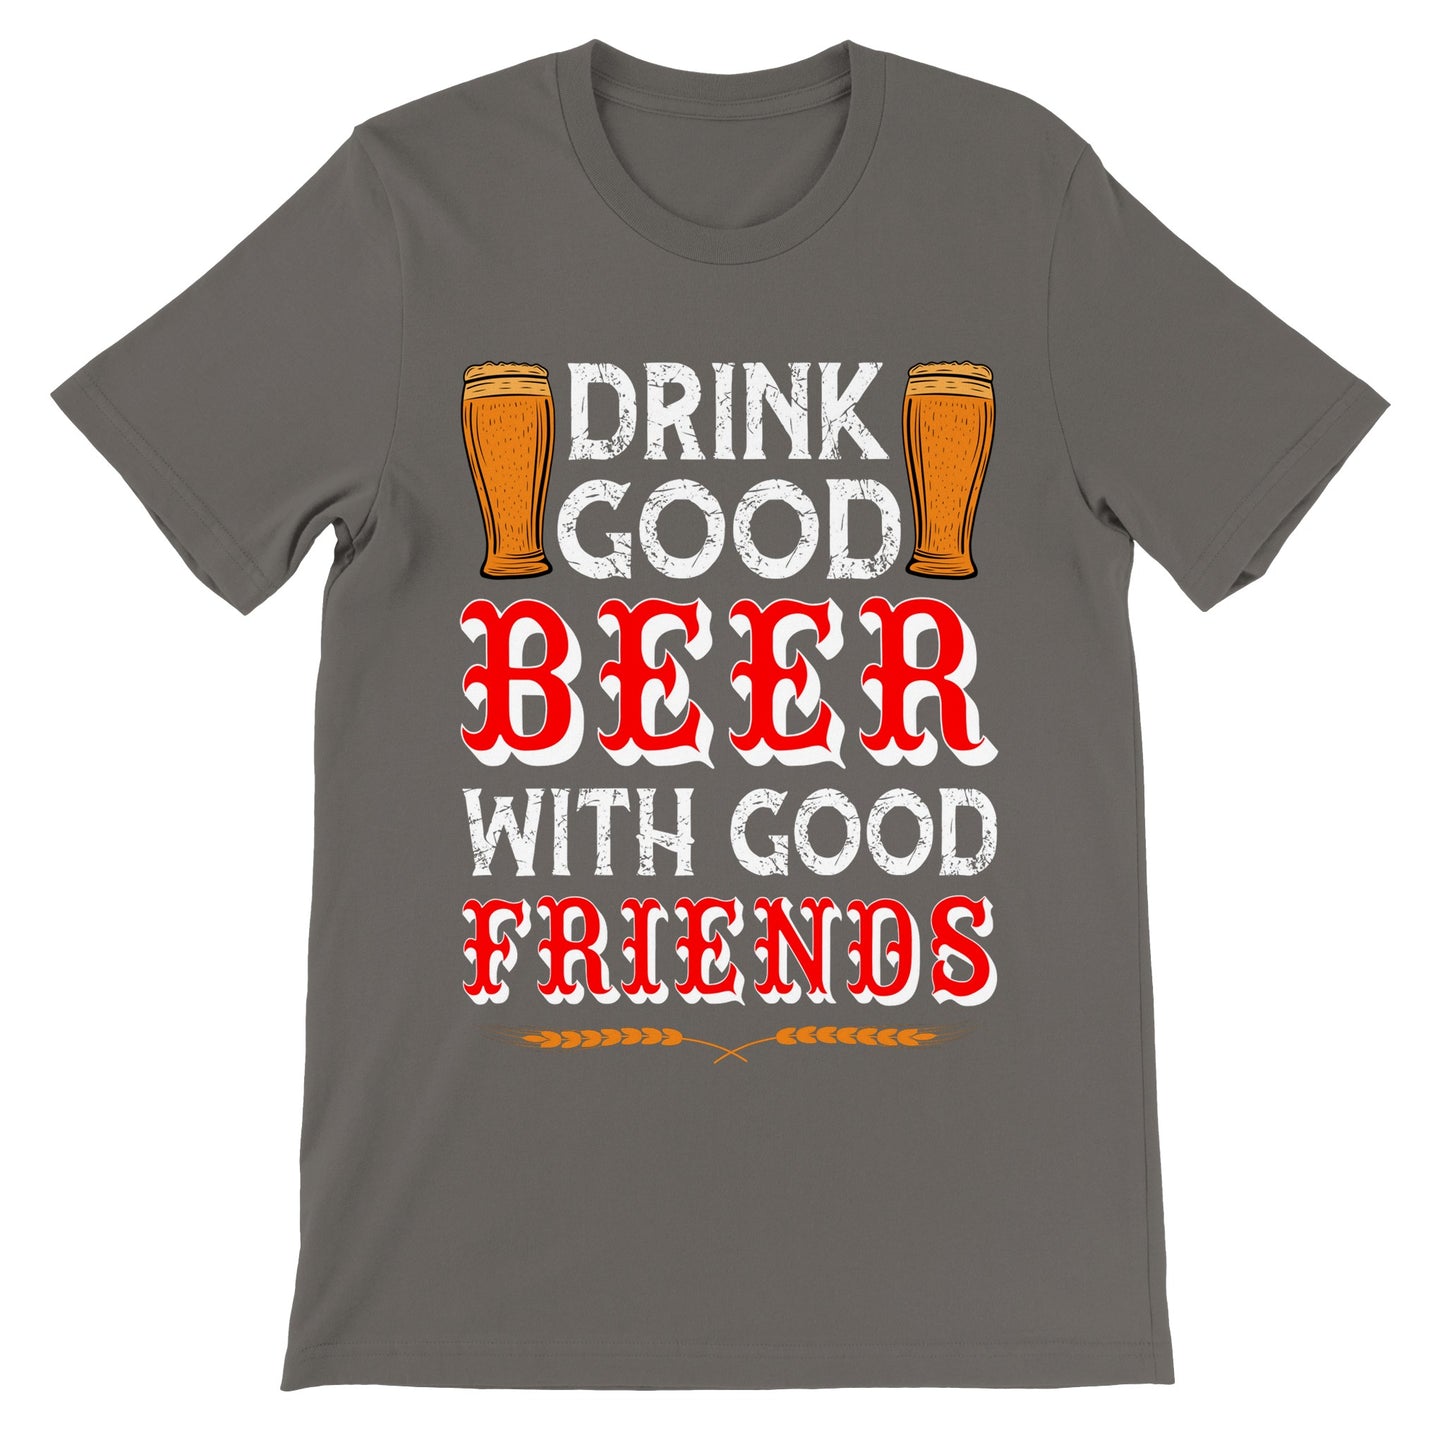 Funny T-shirts - Drink Good Beer With Good Friends - Premium Unisex T-shirt 